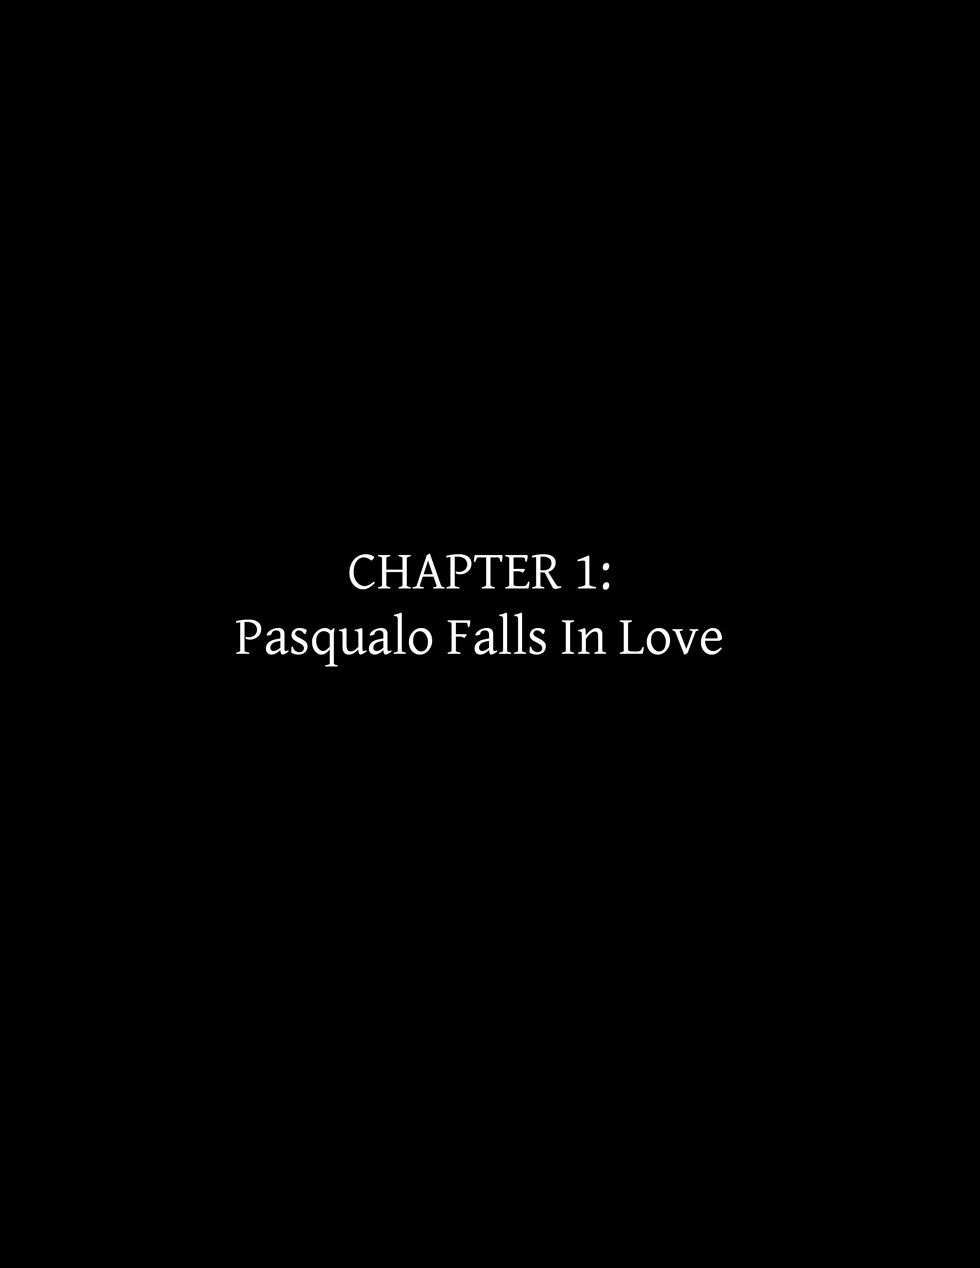 Chapter 1: Pasqualo Falls In Love